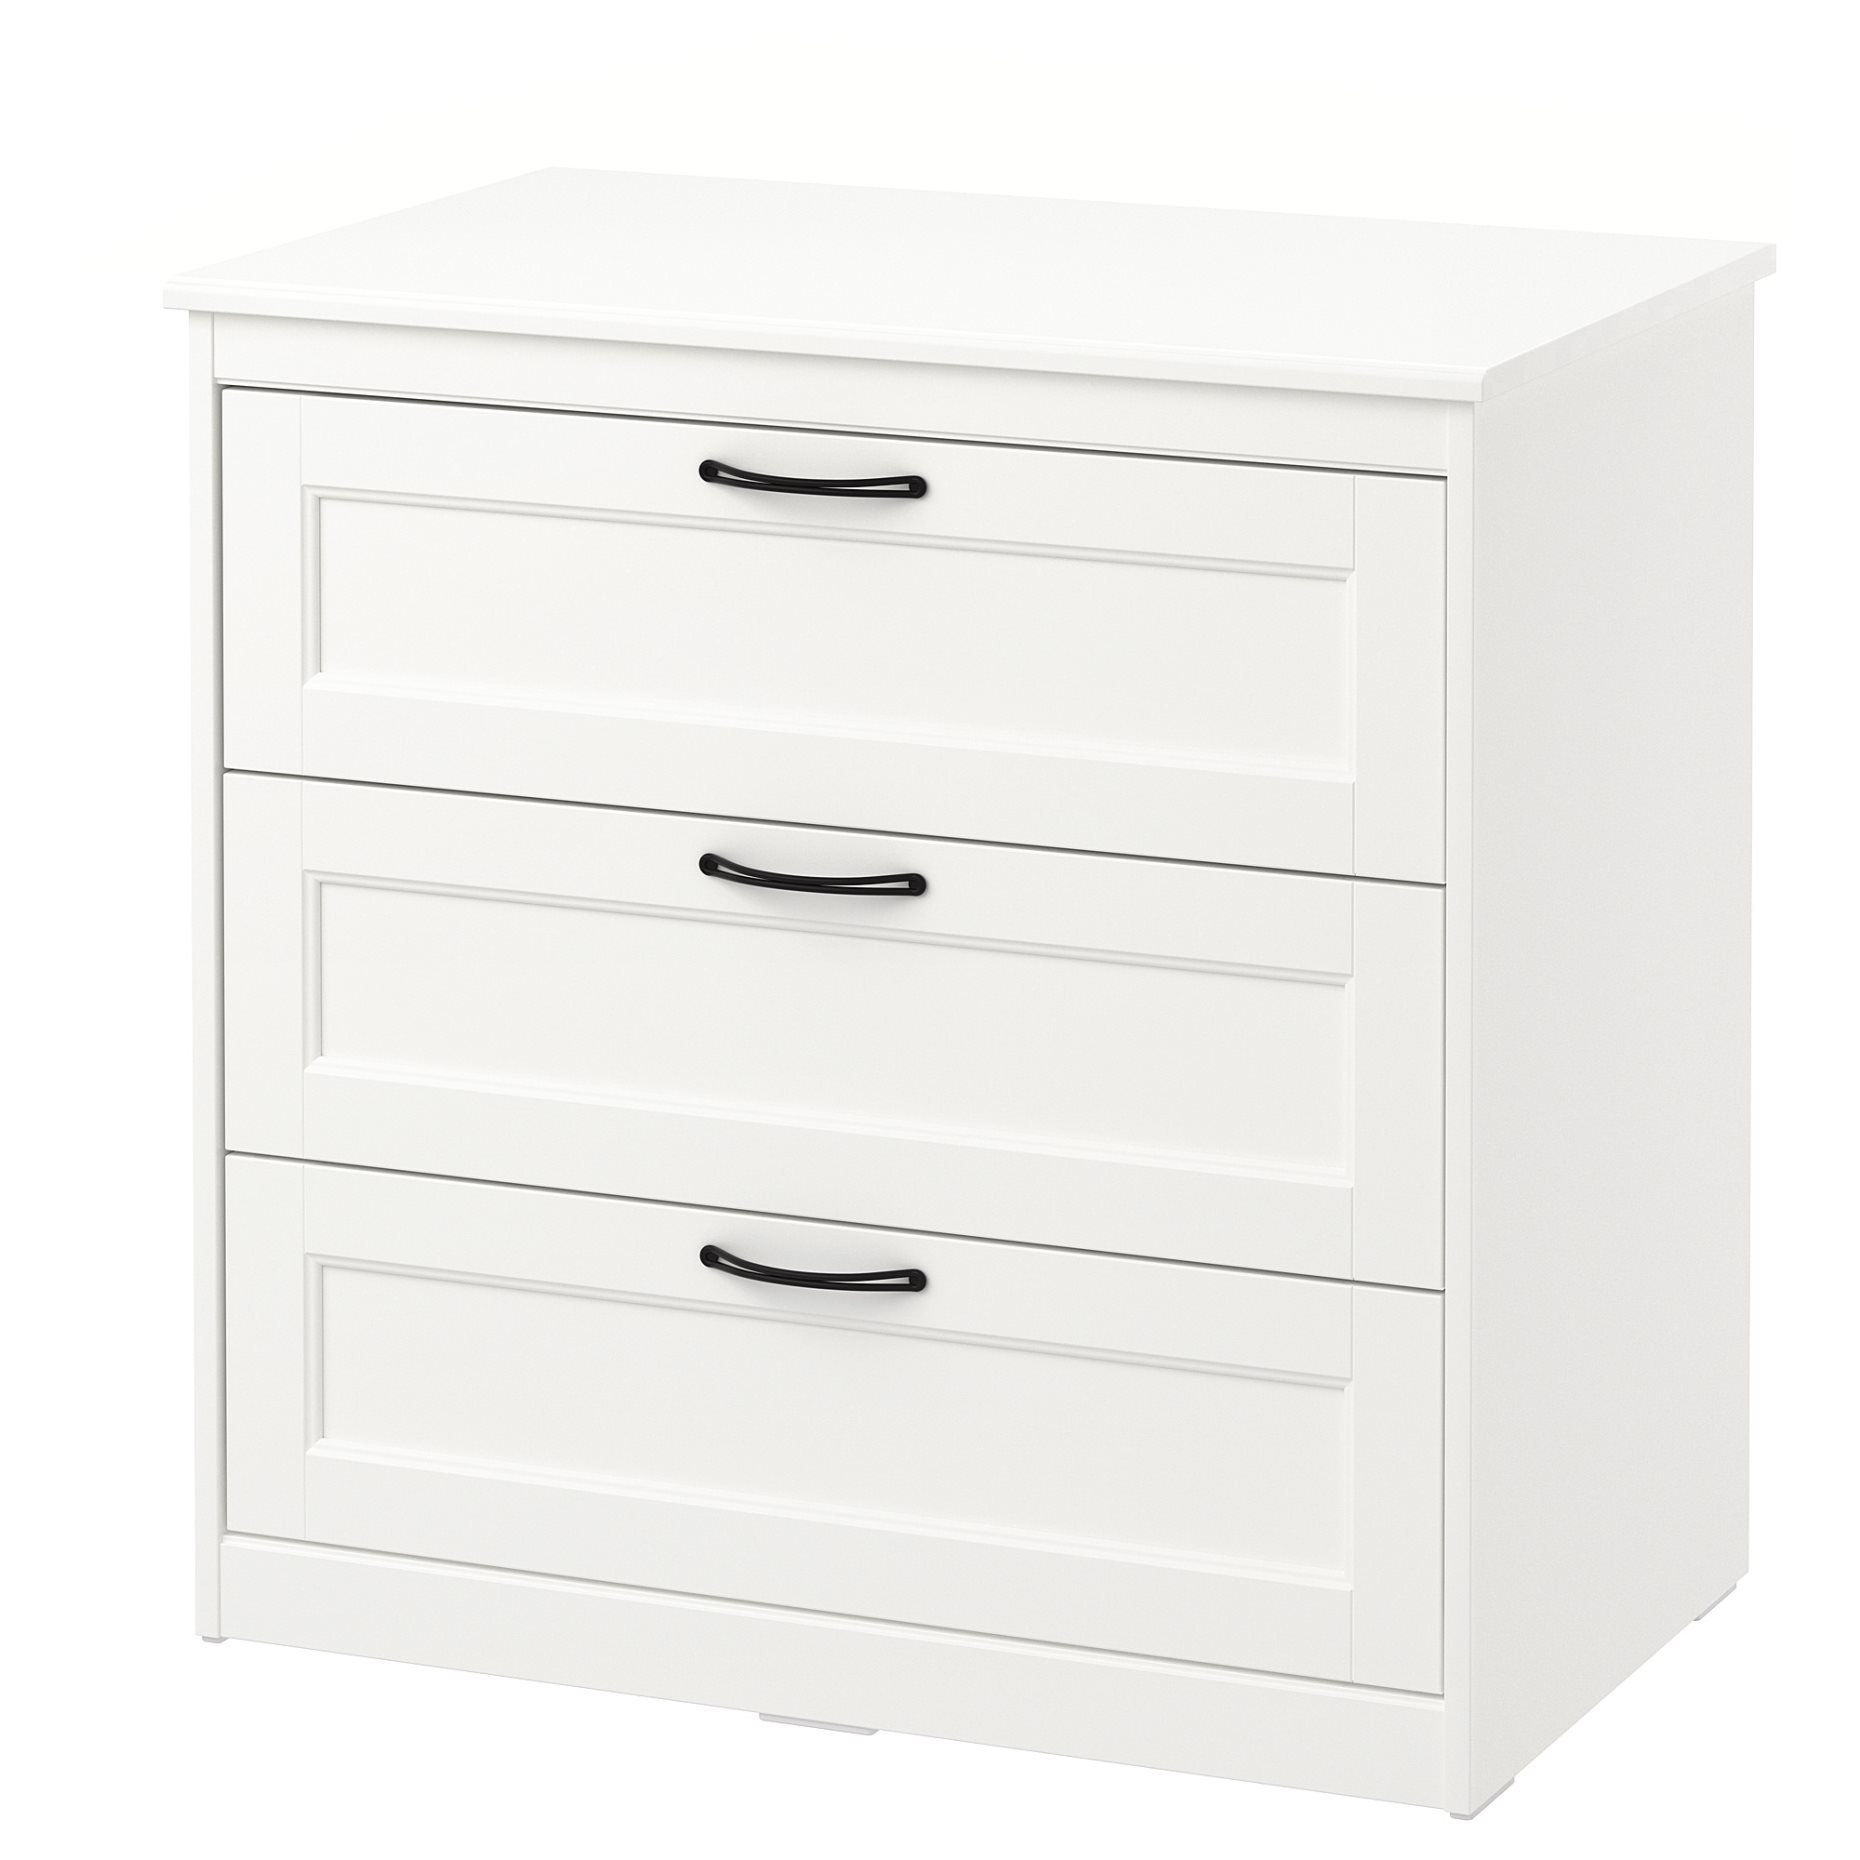 SONGESAND, chest of 3 drawers, 903.668.39